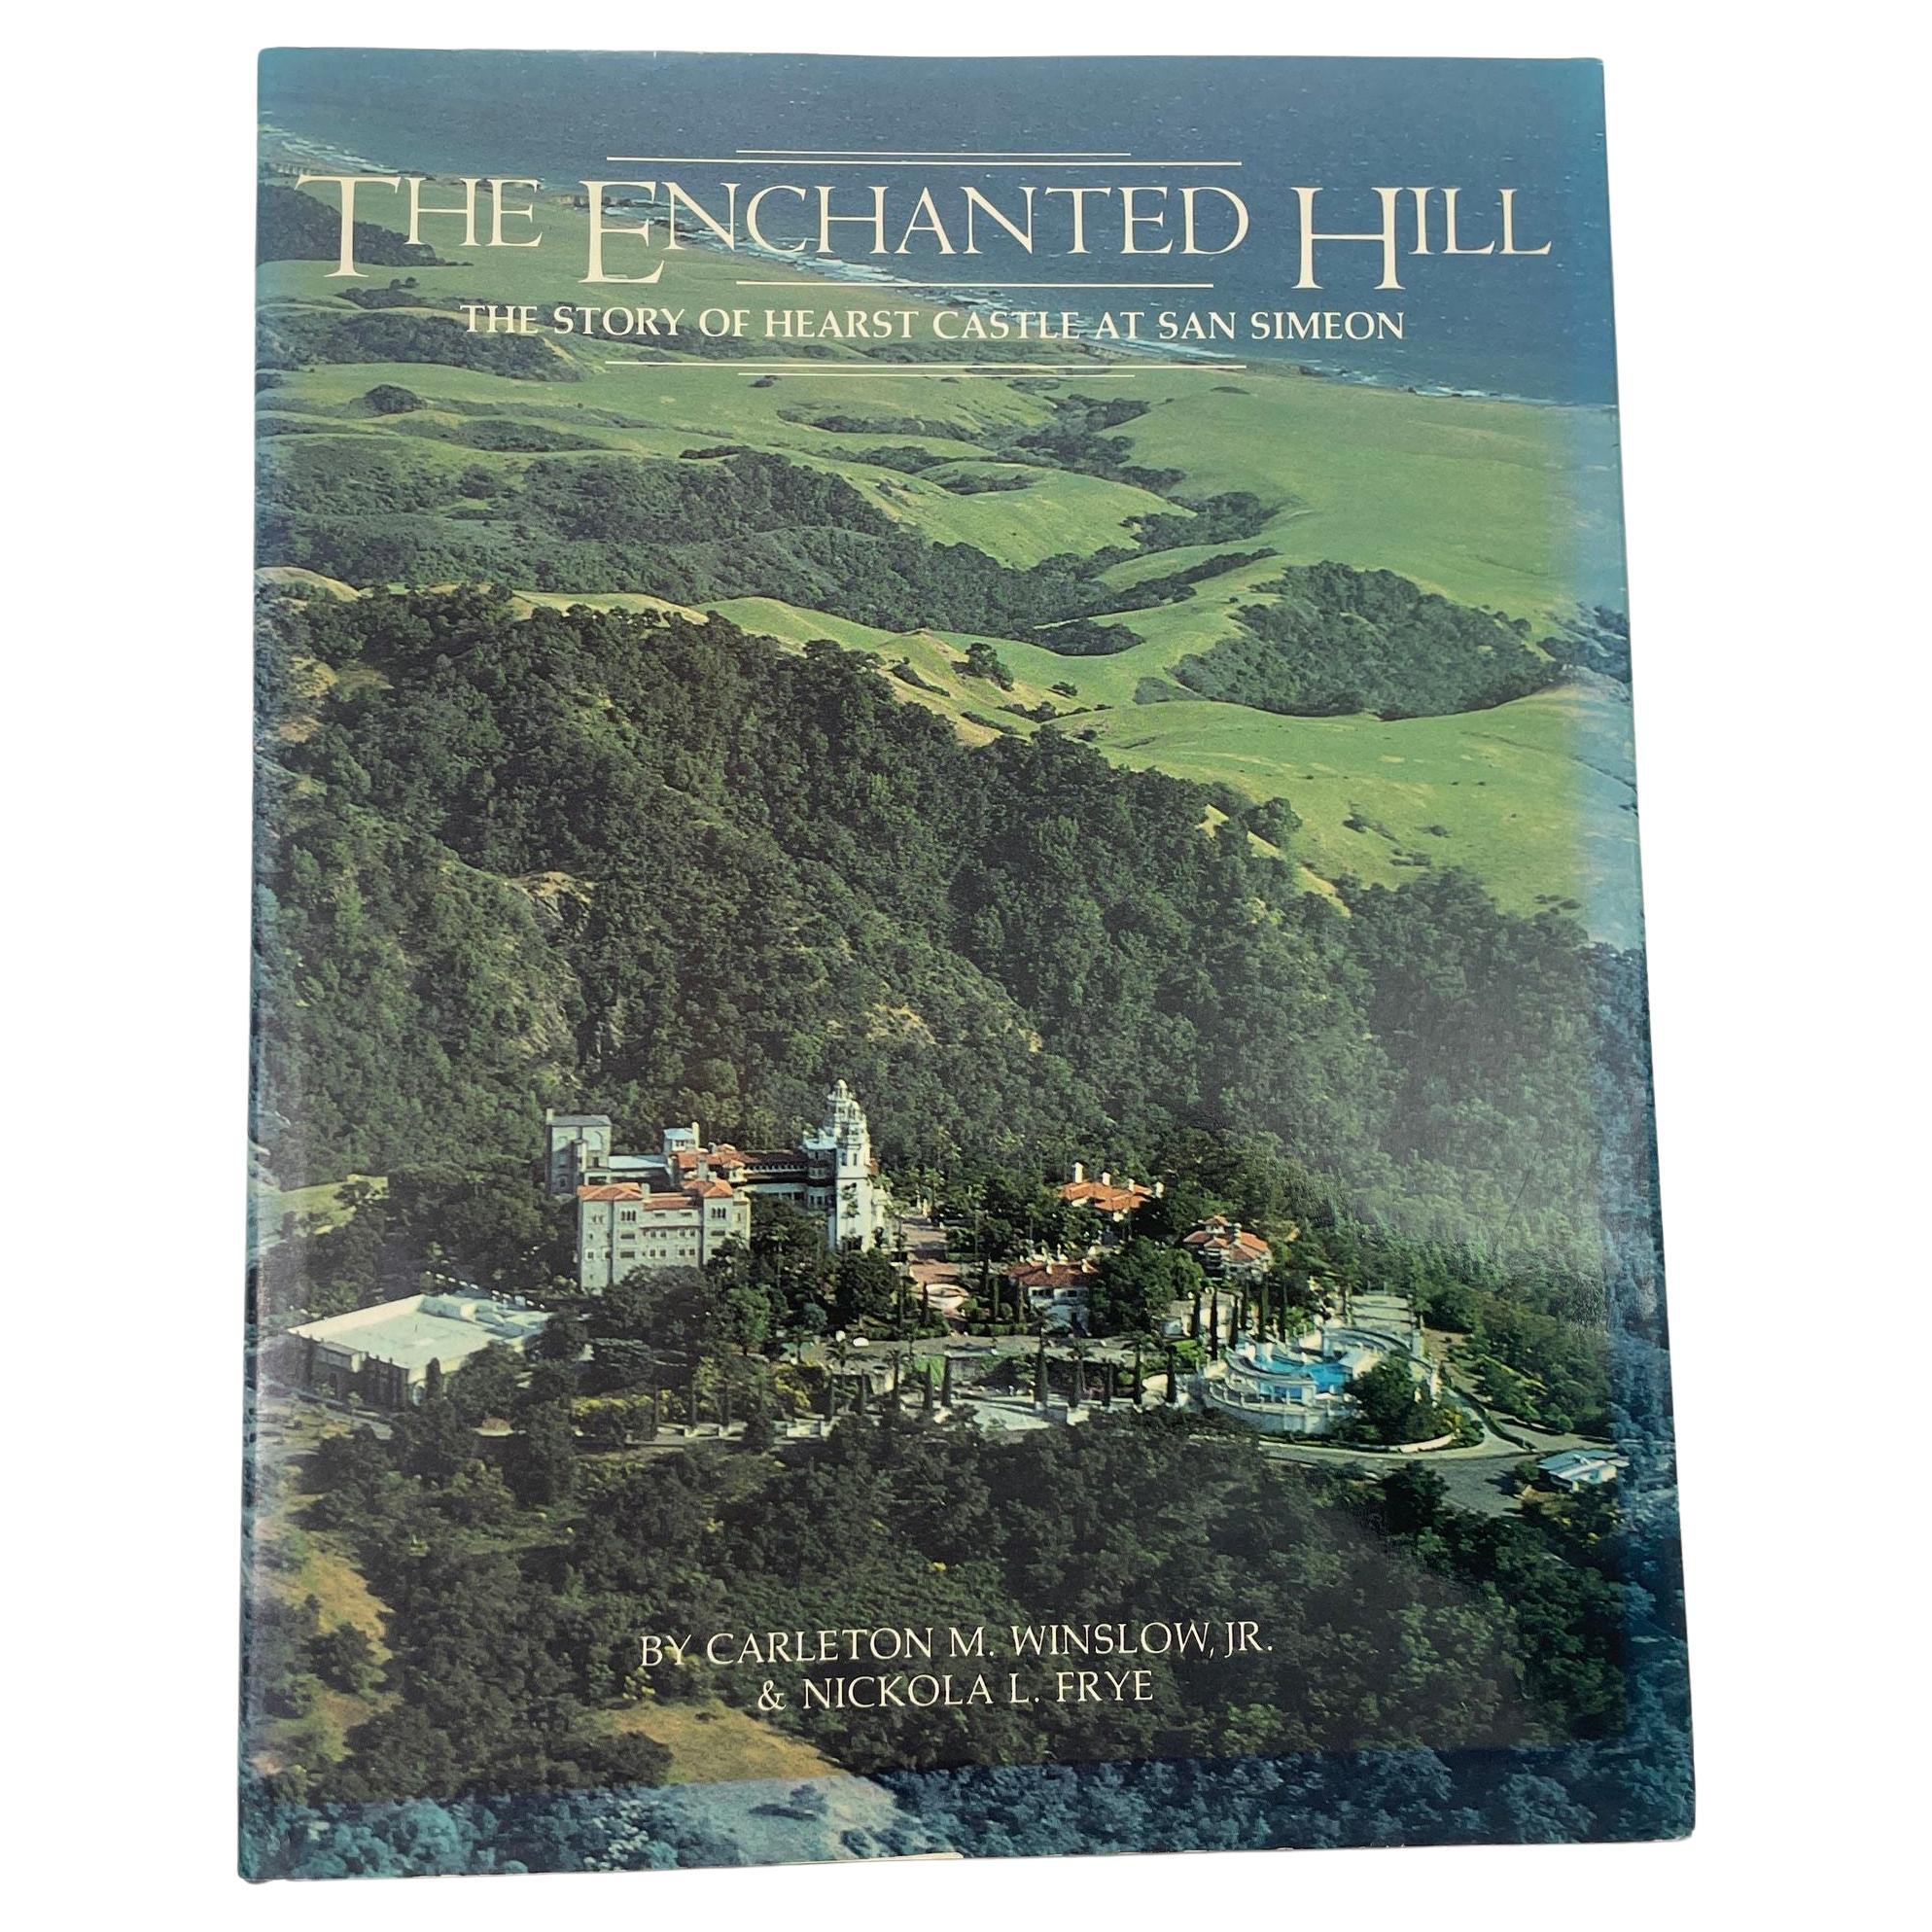 The Enchanted Hill The story of Hearst Castle at San Simeon Hardcover 1980 For Sale